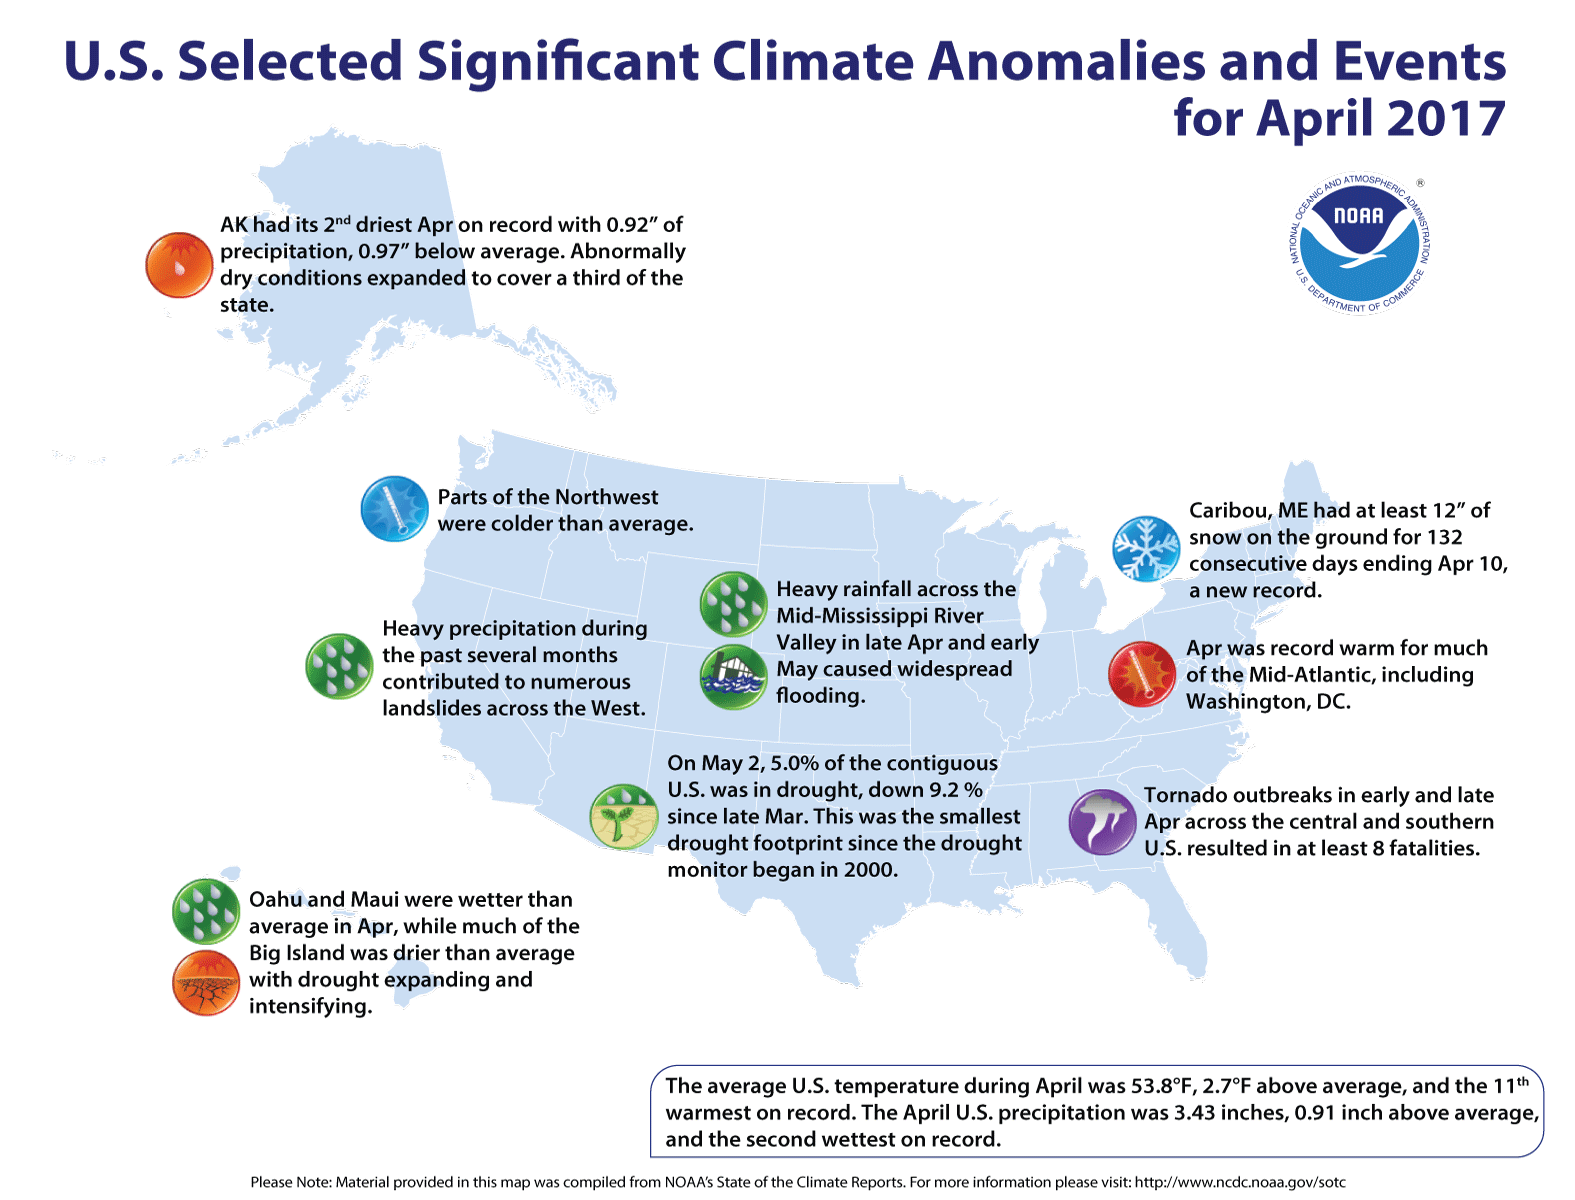 Here are some of the significant climate events that occurred across the country in April 2017.